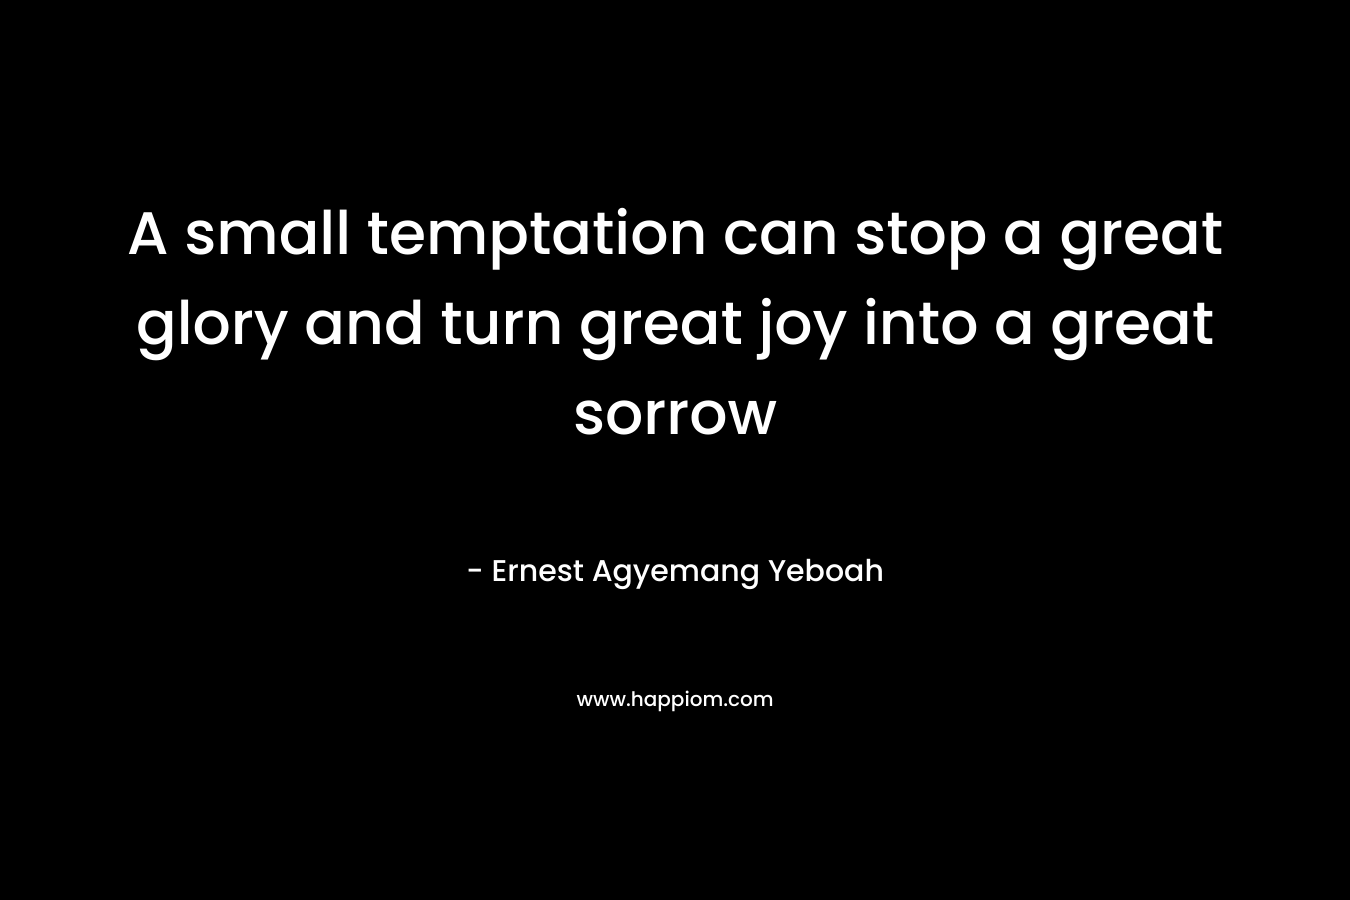 A small temptation can stop a great glory and turn great joy into a great sorrow